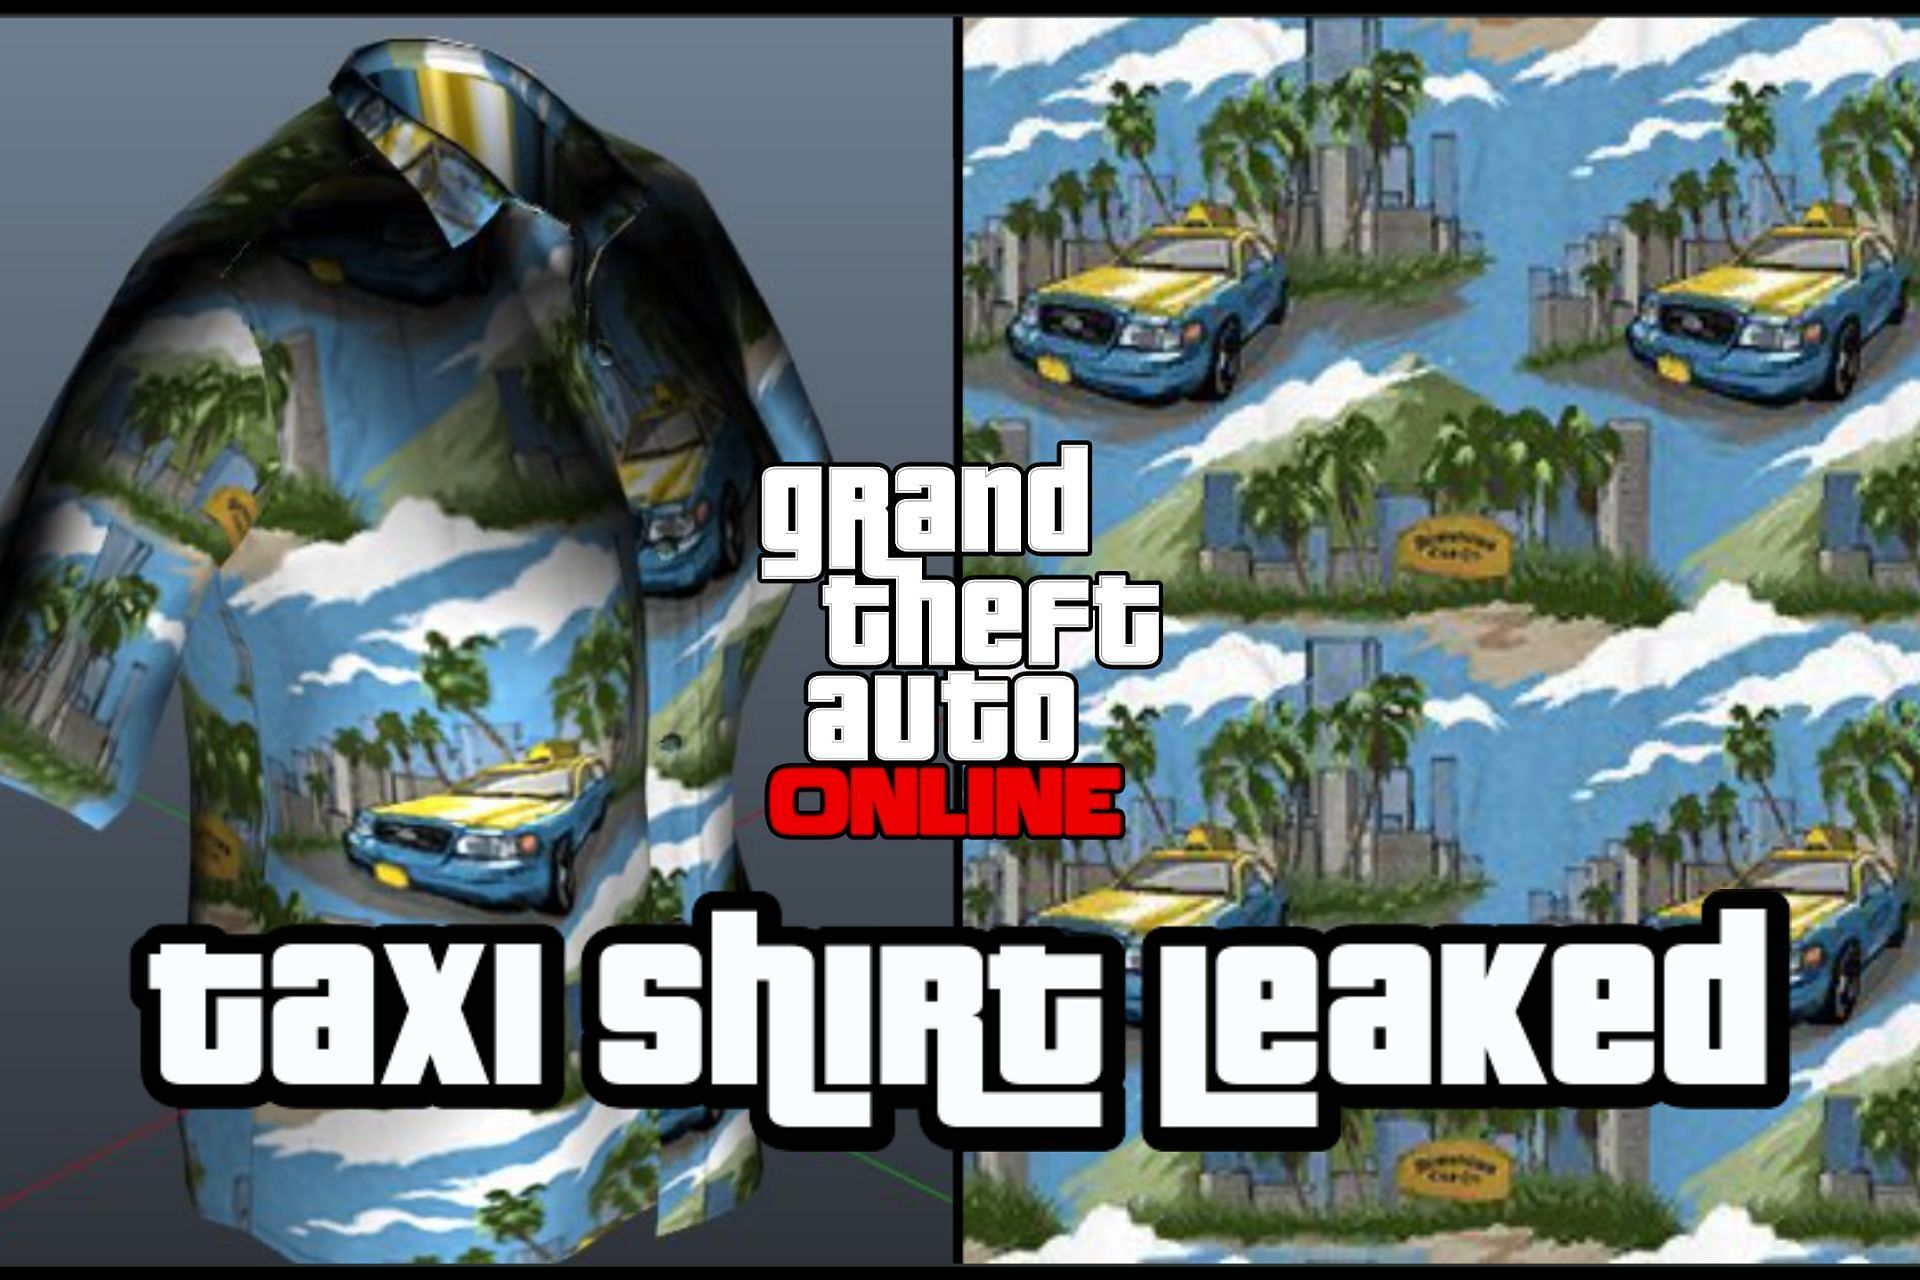 The Taxi Shirt is one of the most anticipated additions to GTA Online following the inclusion of the Taxi business (Image via Twitter/ Gaming Detective)